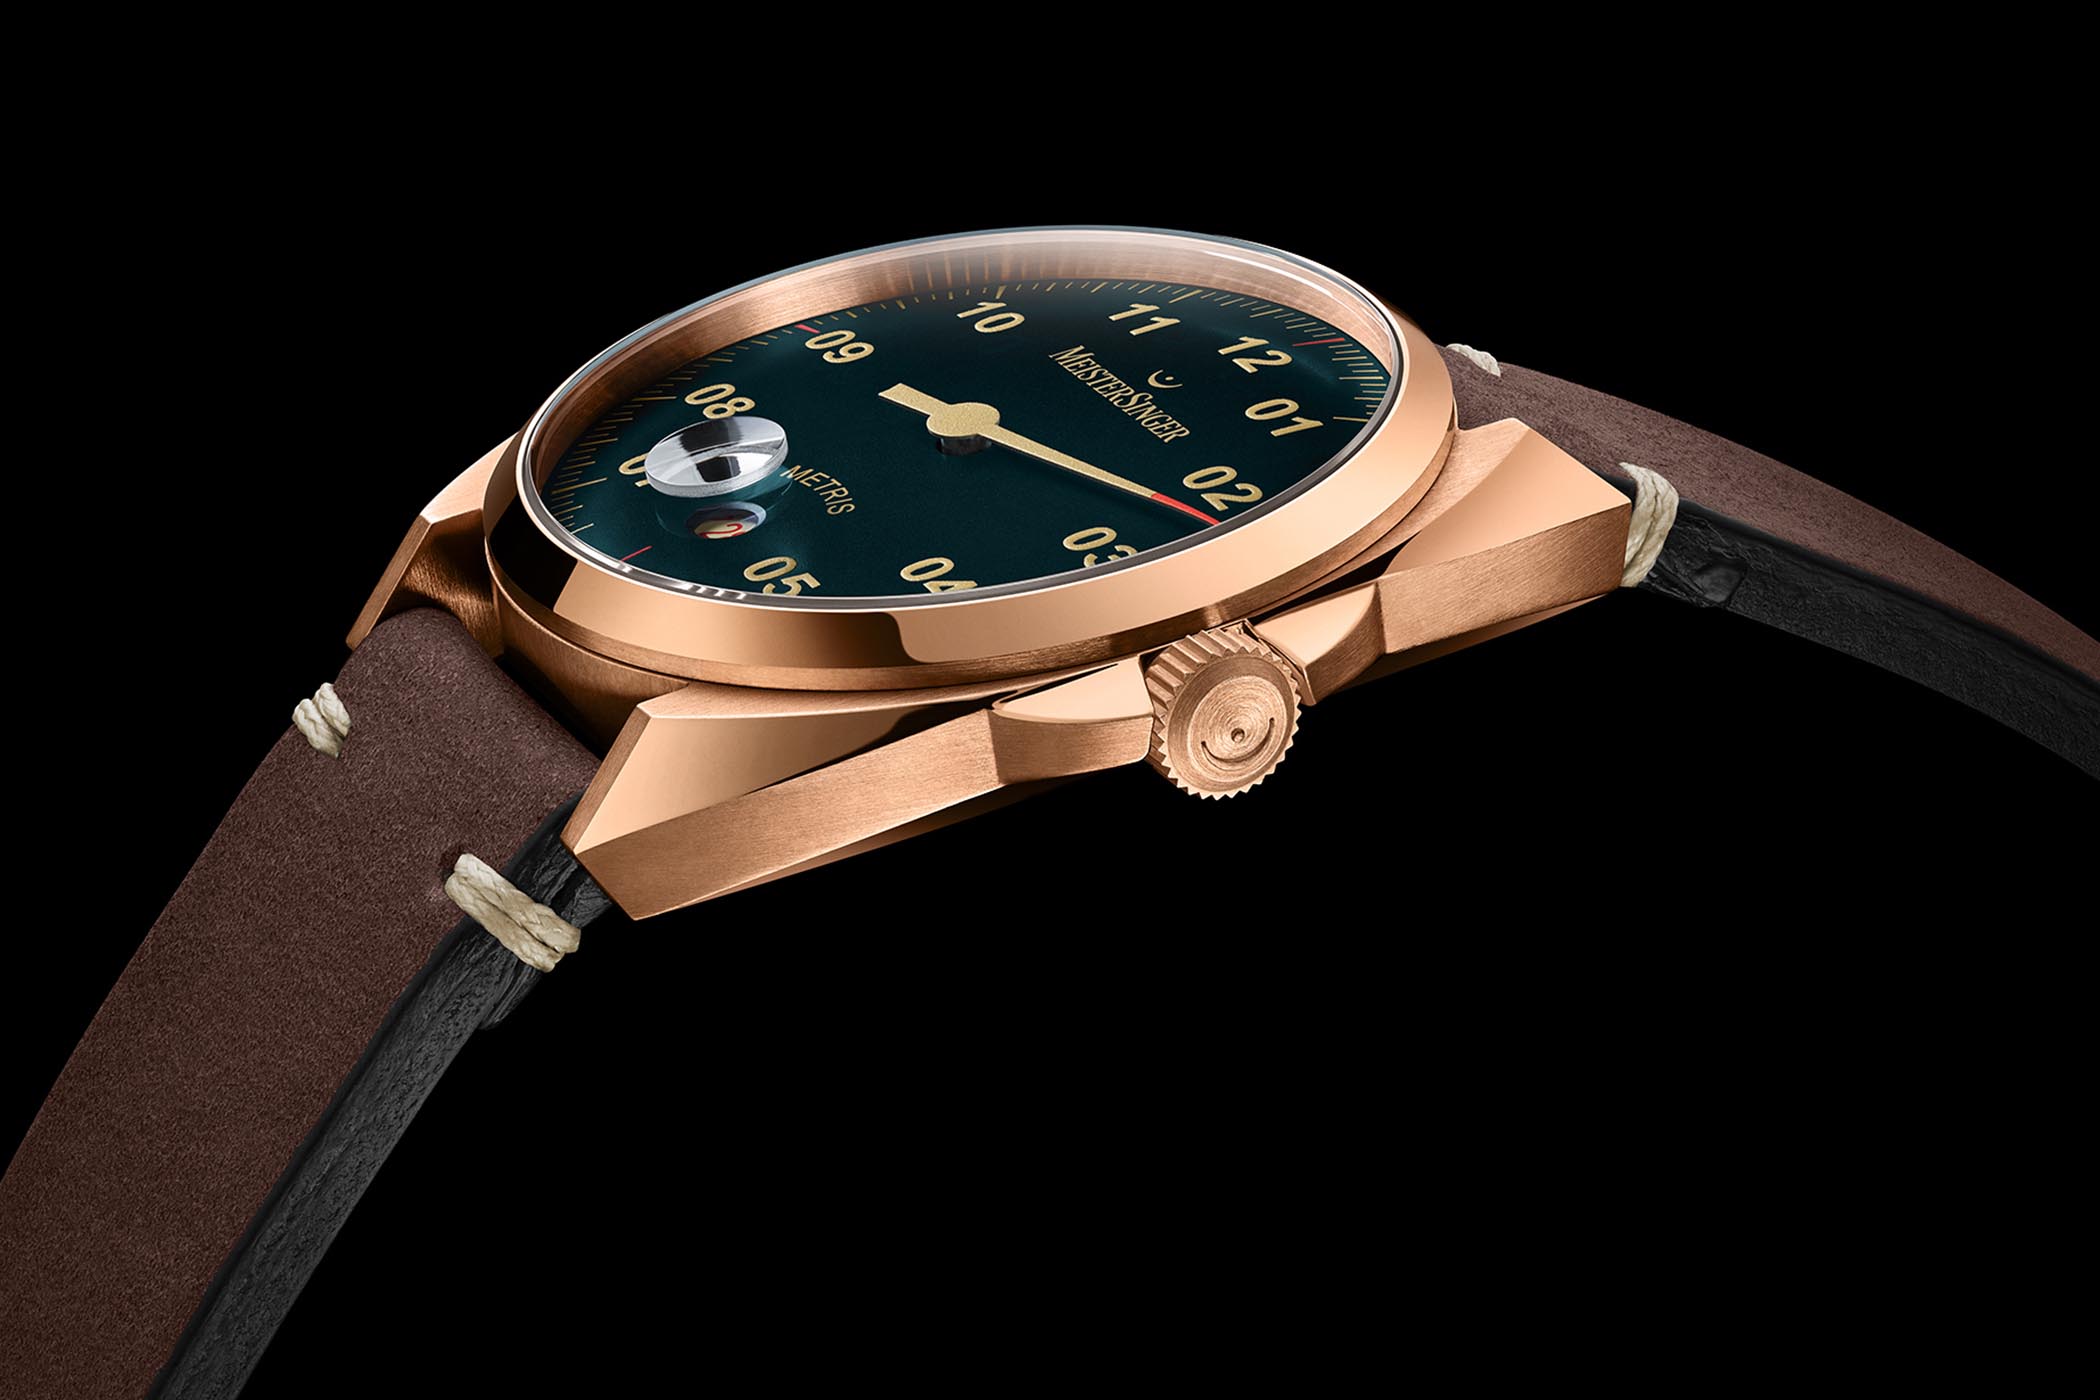 Baselworld 2019 - MeisterSinger Bronze Editions No. 03, Perigraph and Metris - 5